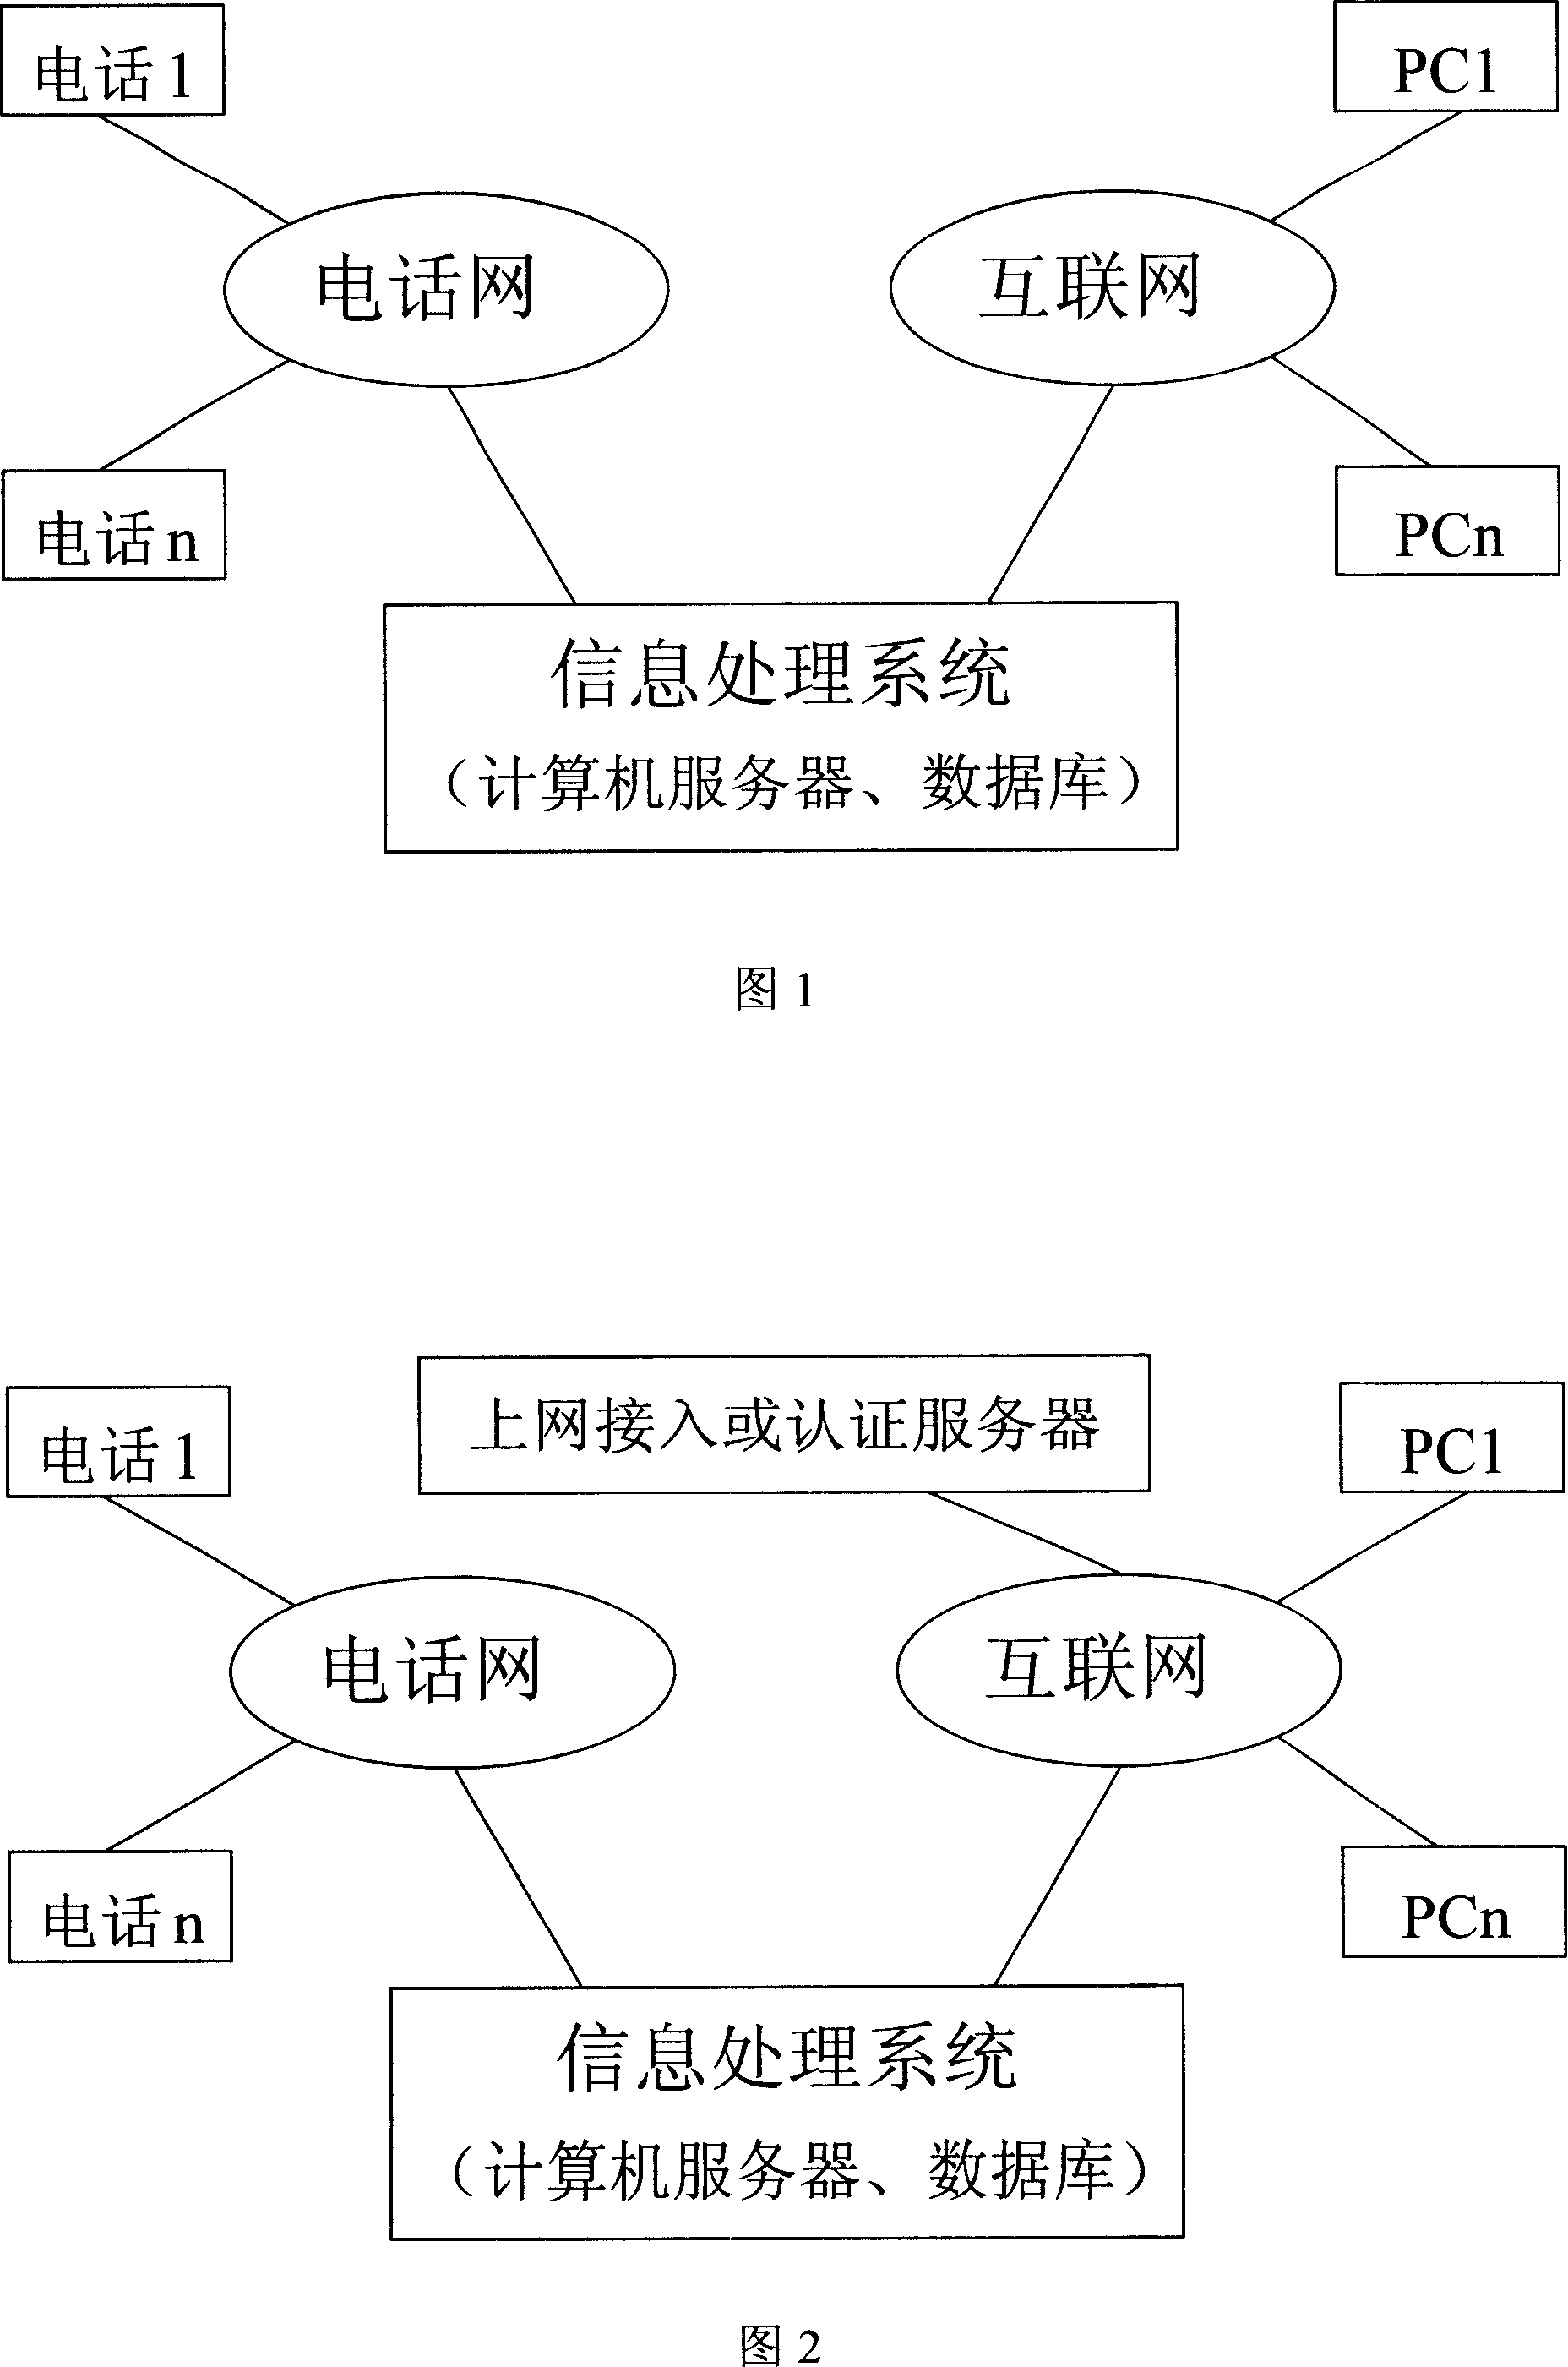 A method for providing the phone network communication information to the computers in the Internet and its system